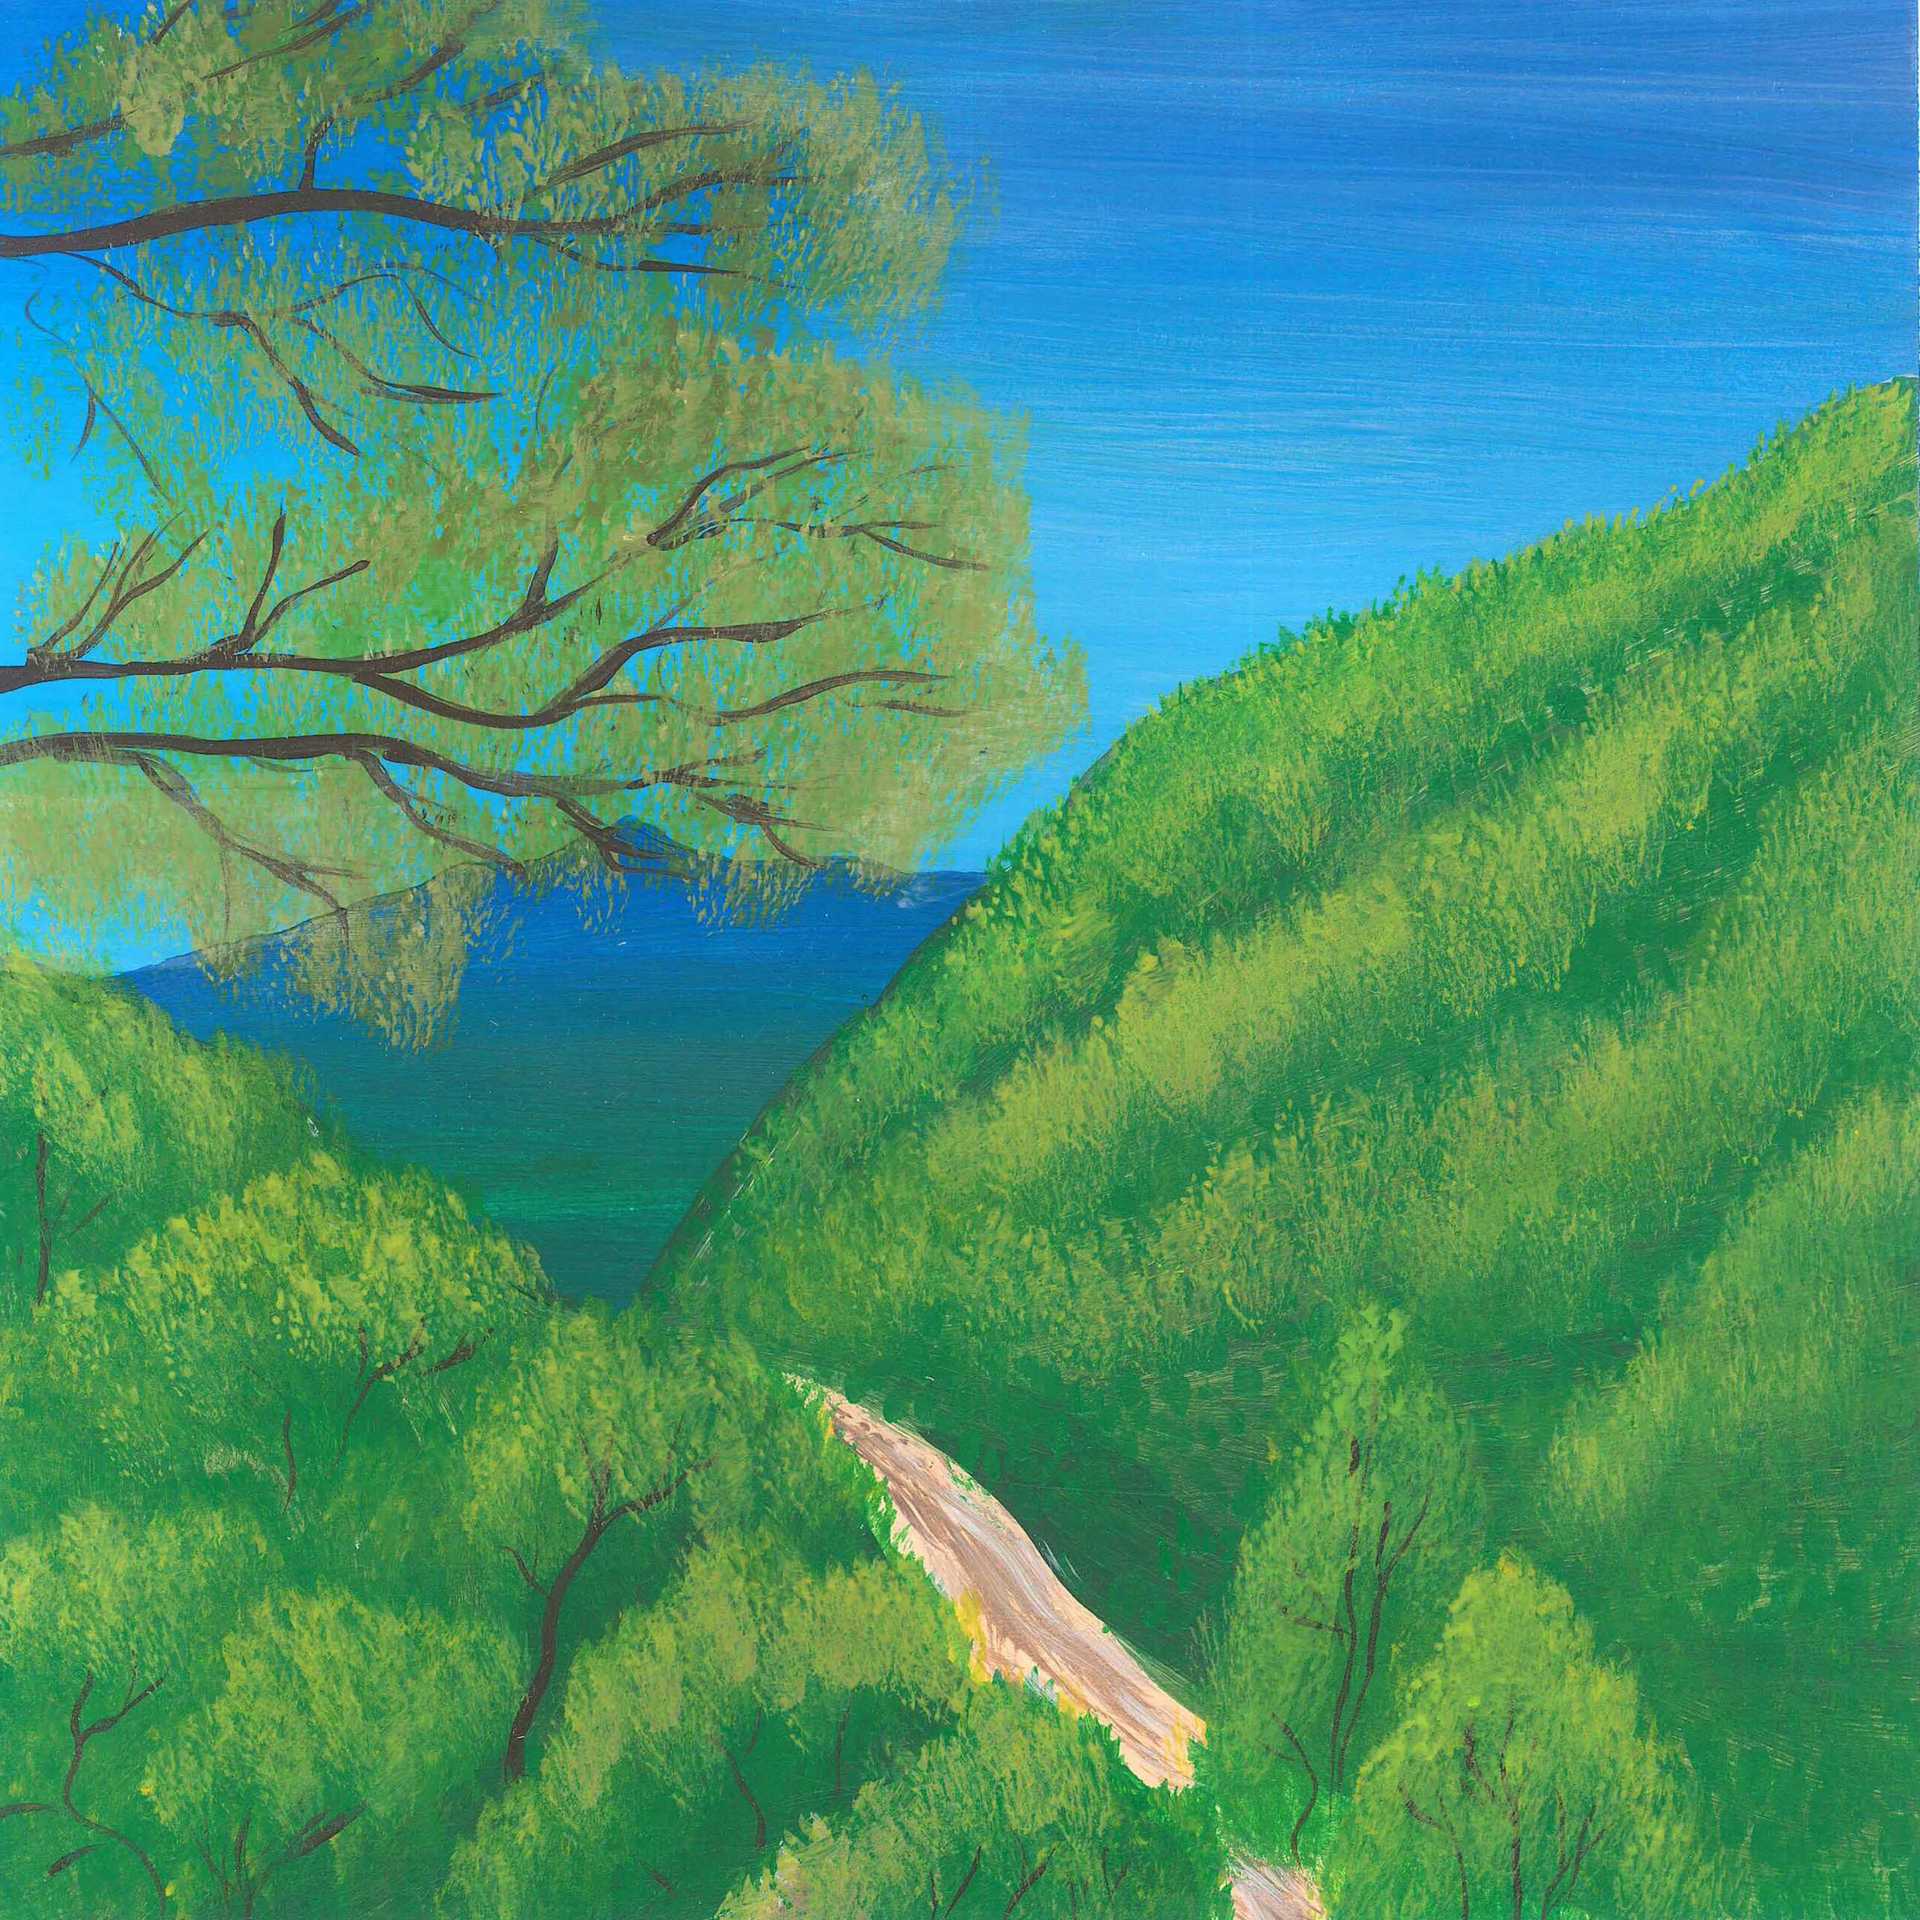 Spring Morning with Cicadas - nature landscape painting - earth.fm